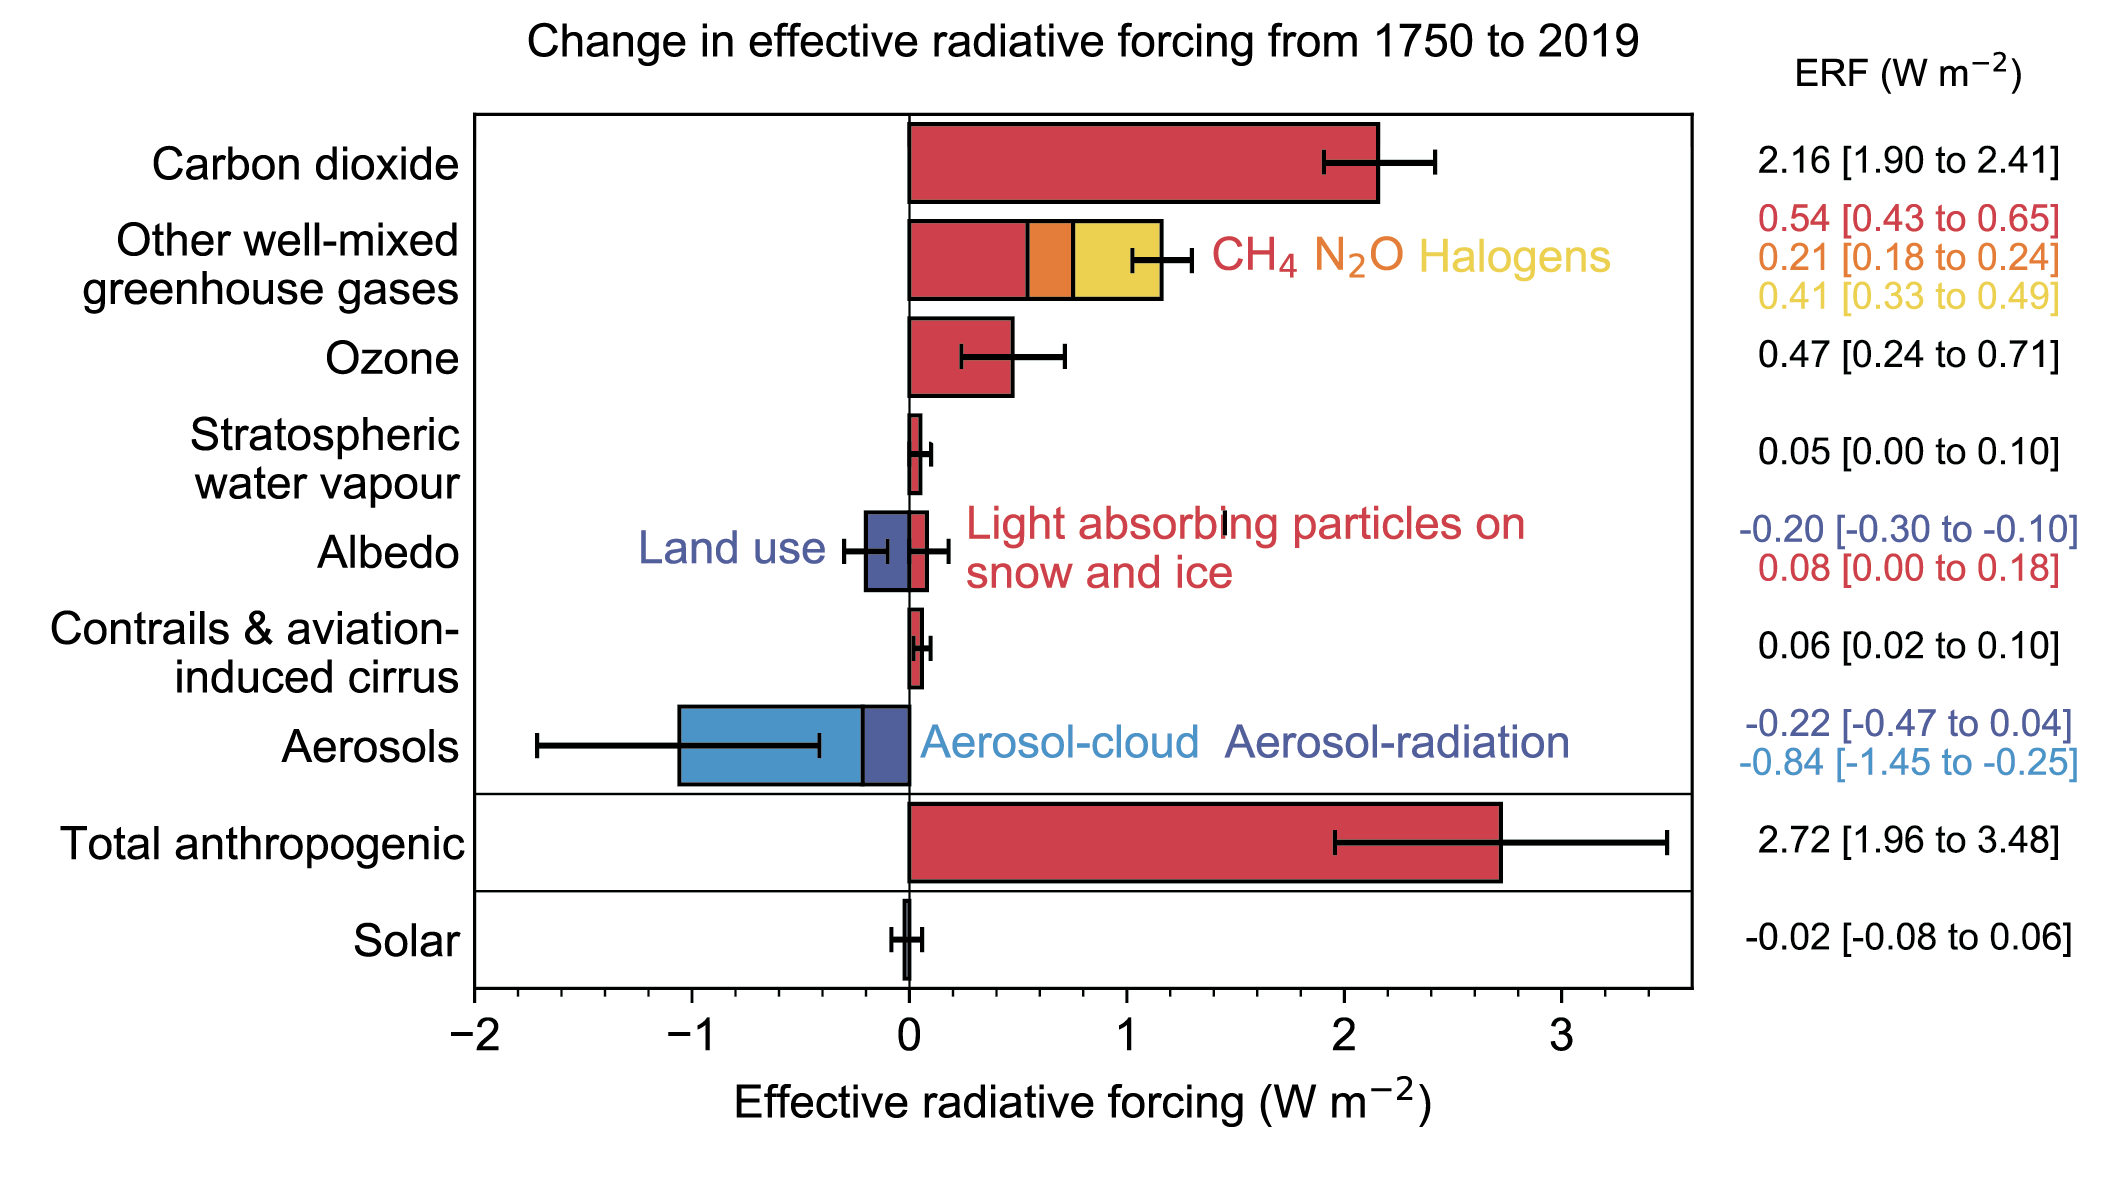 Bar chart of radiative forcings 1750-2019.